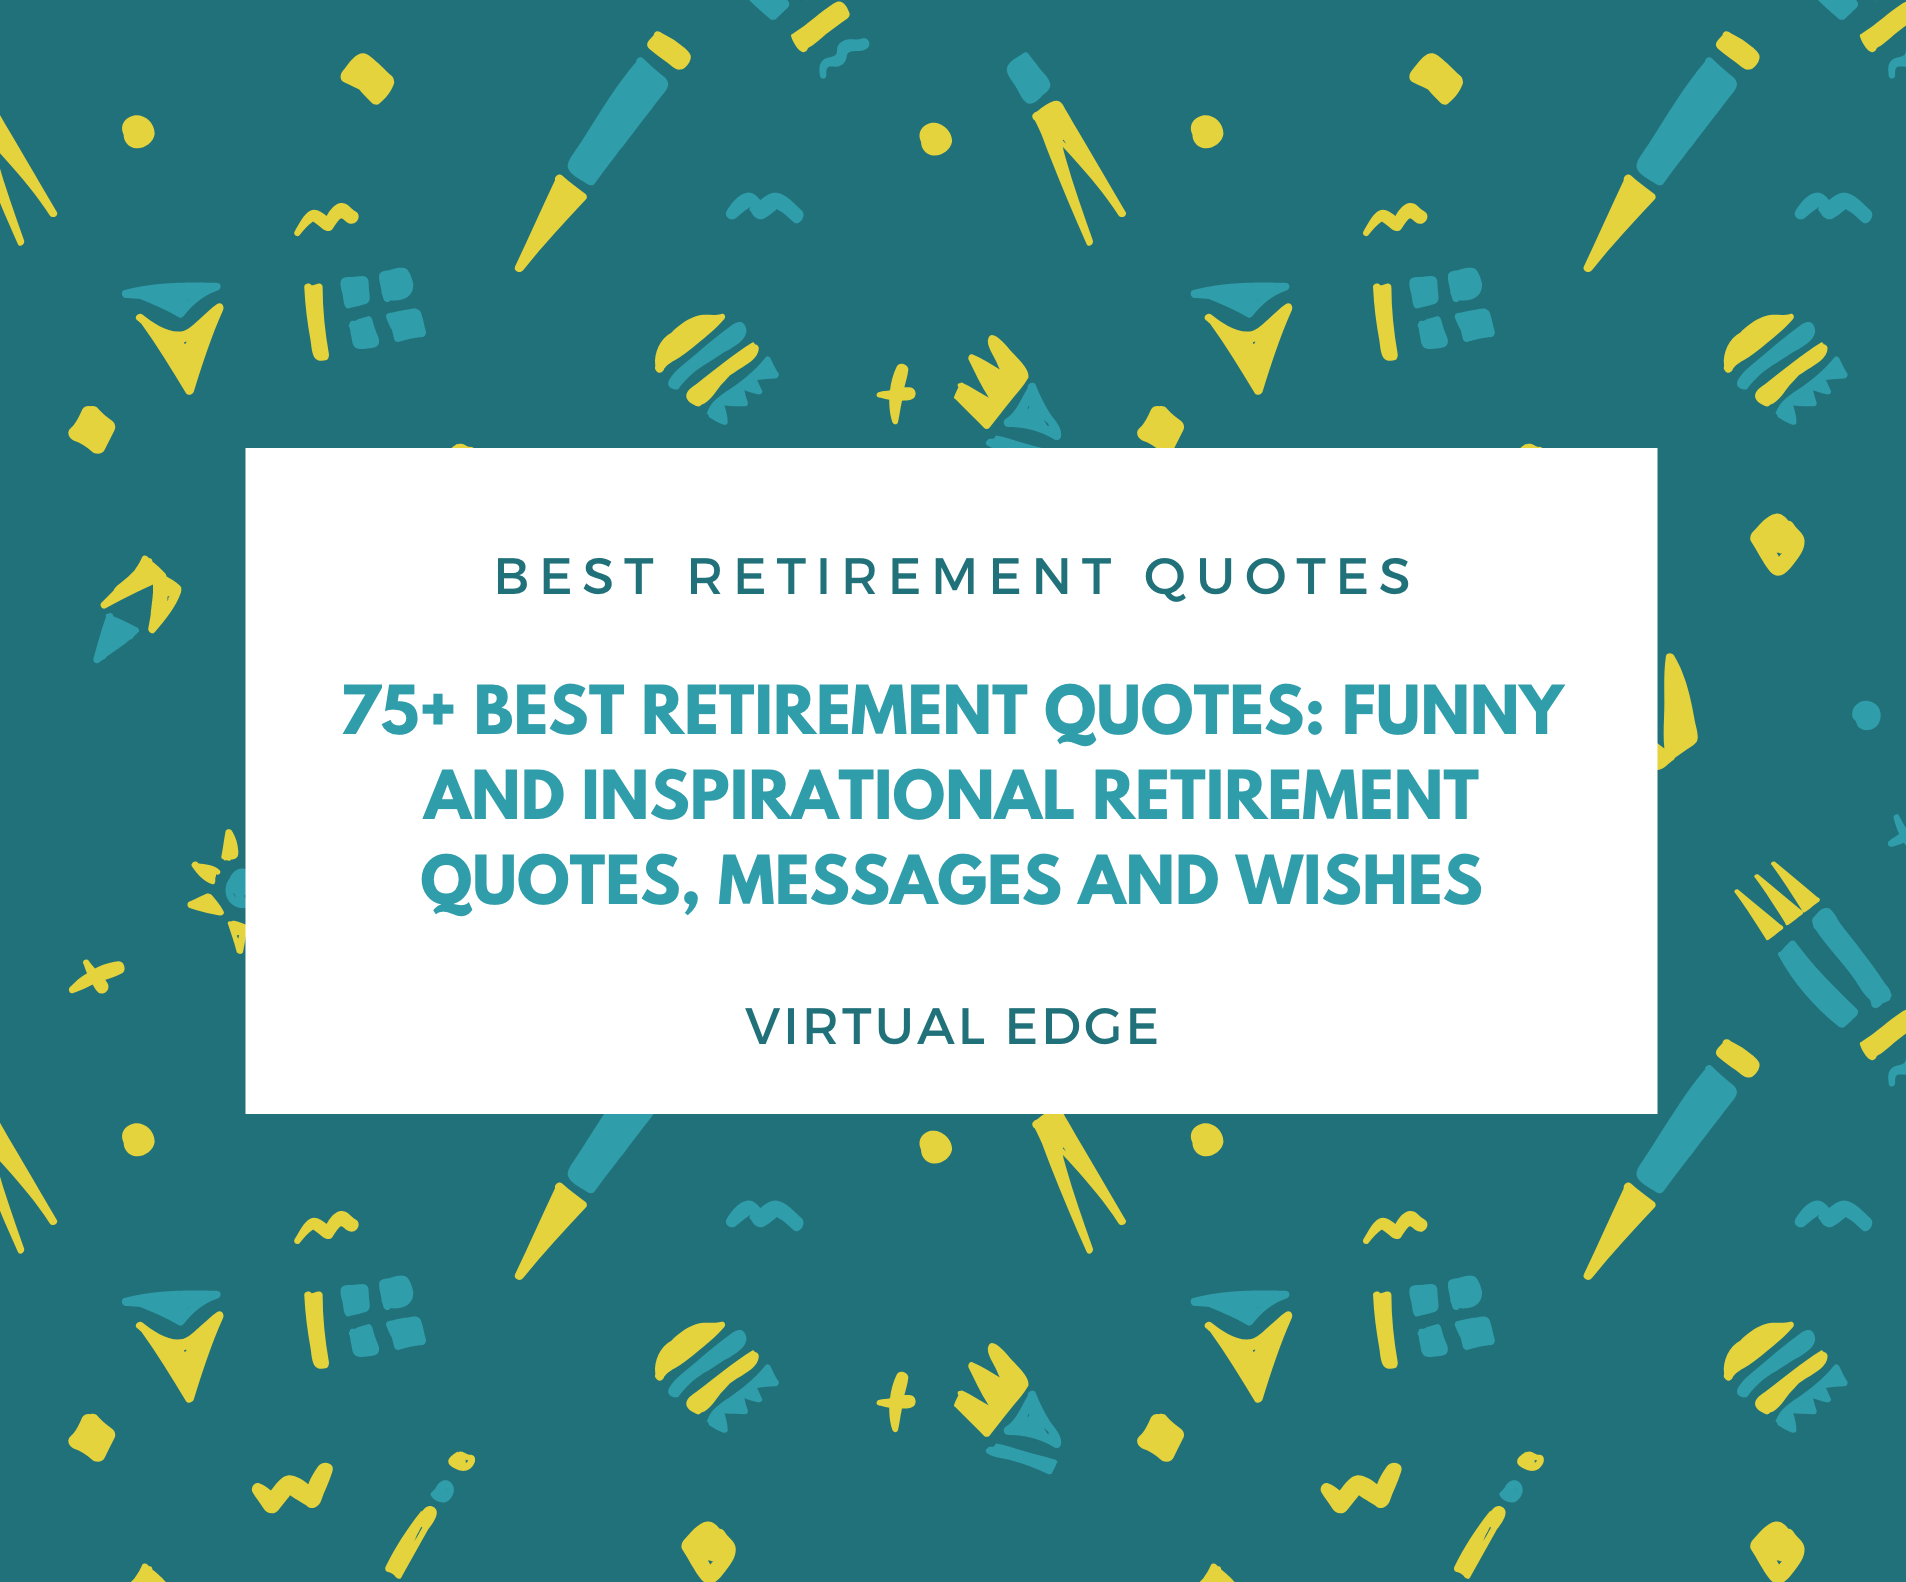 75+ Best Retirement Quotes: Funny and Inspirational Retirement Quotes, Messages and Wishes